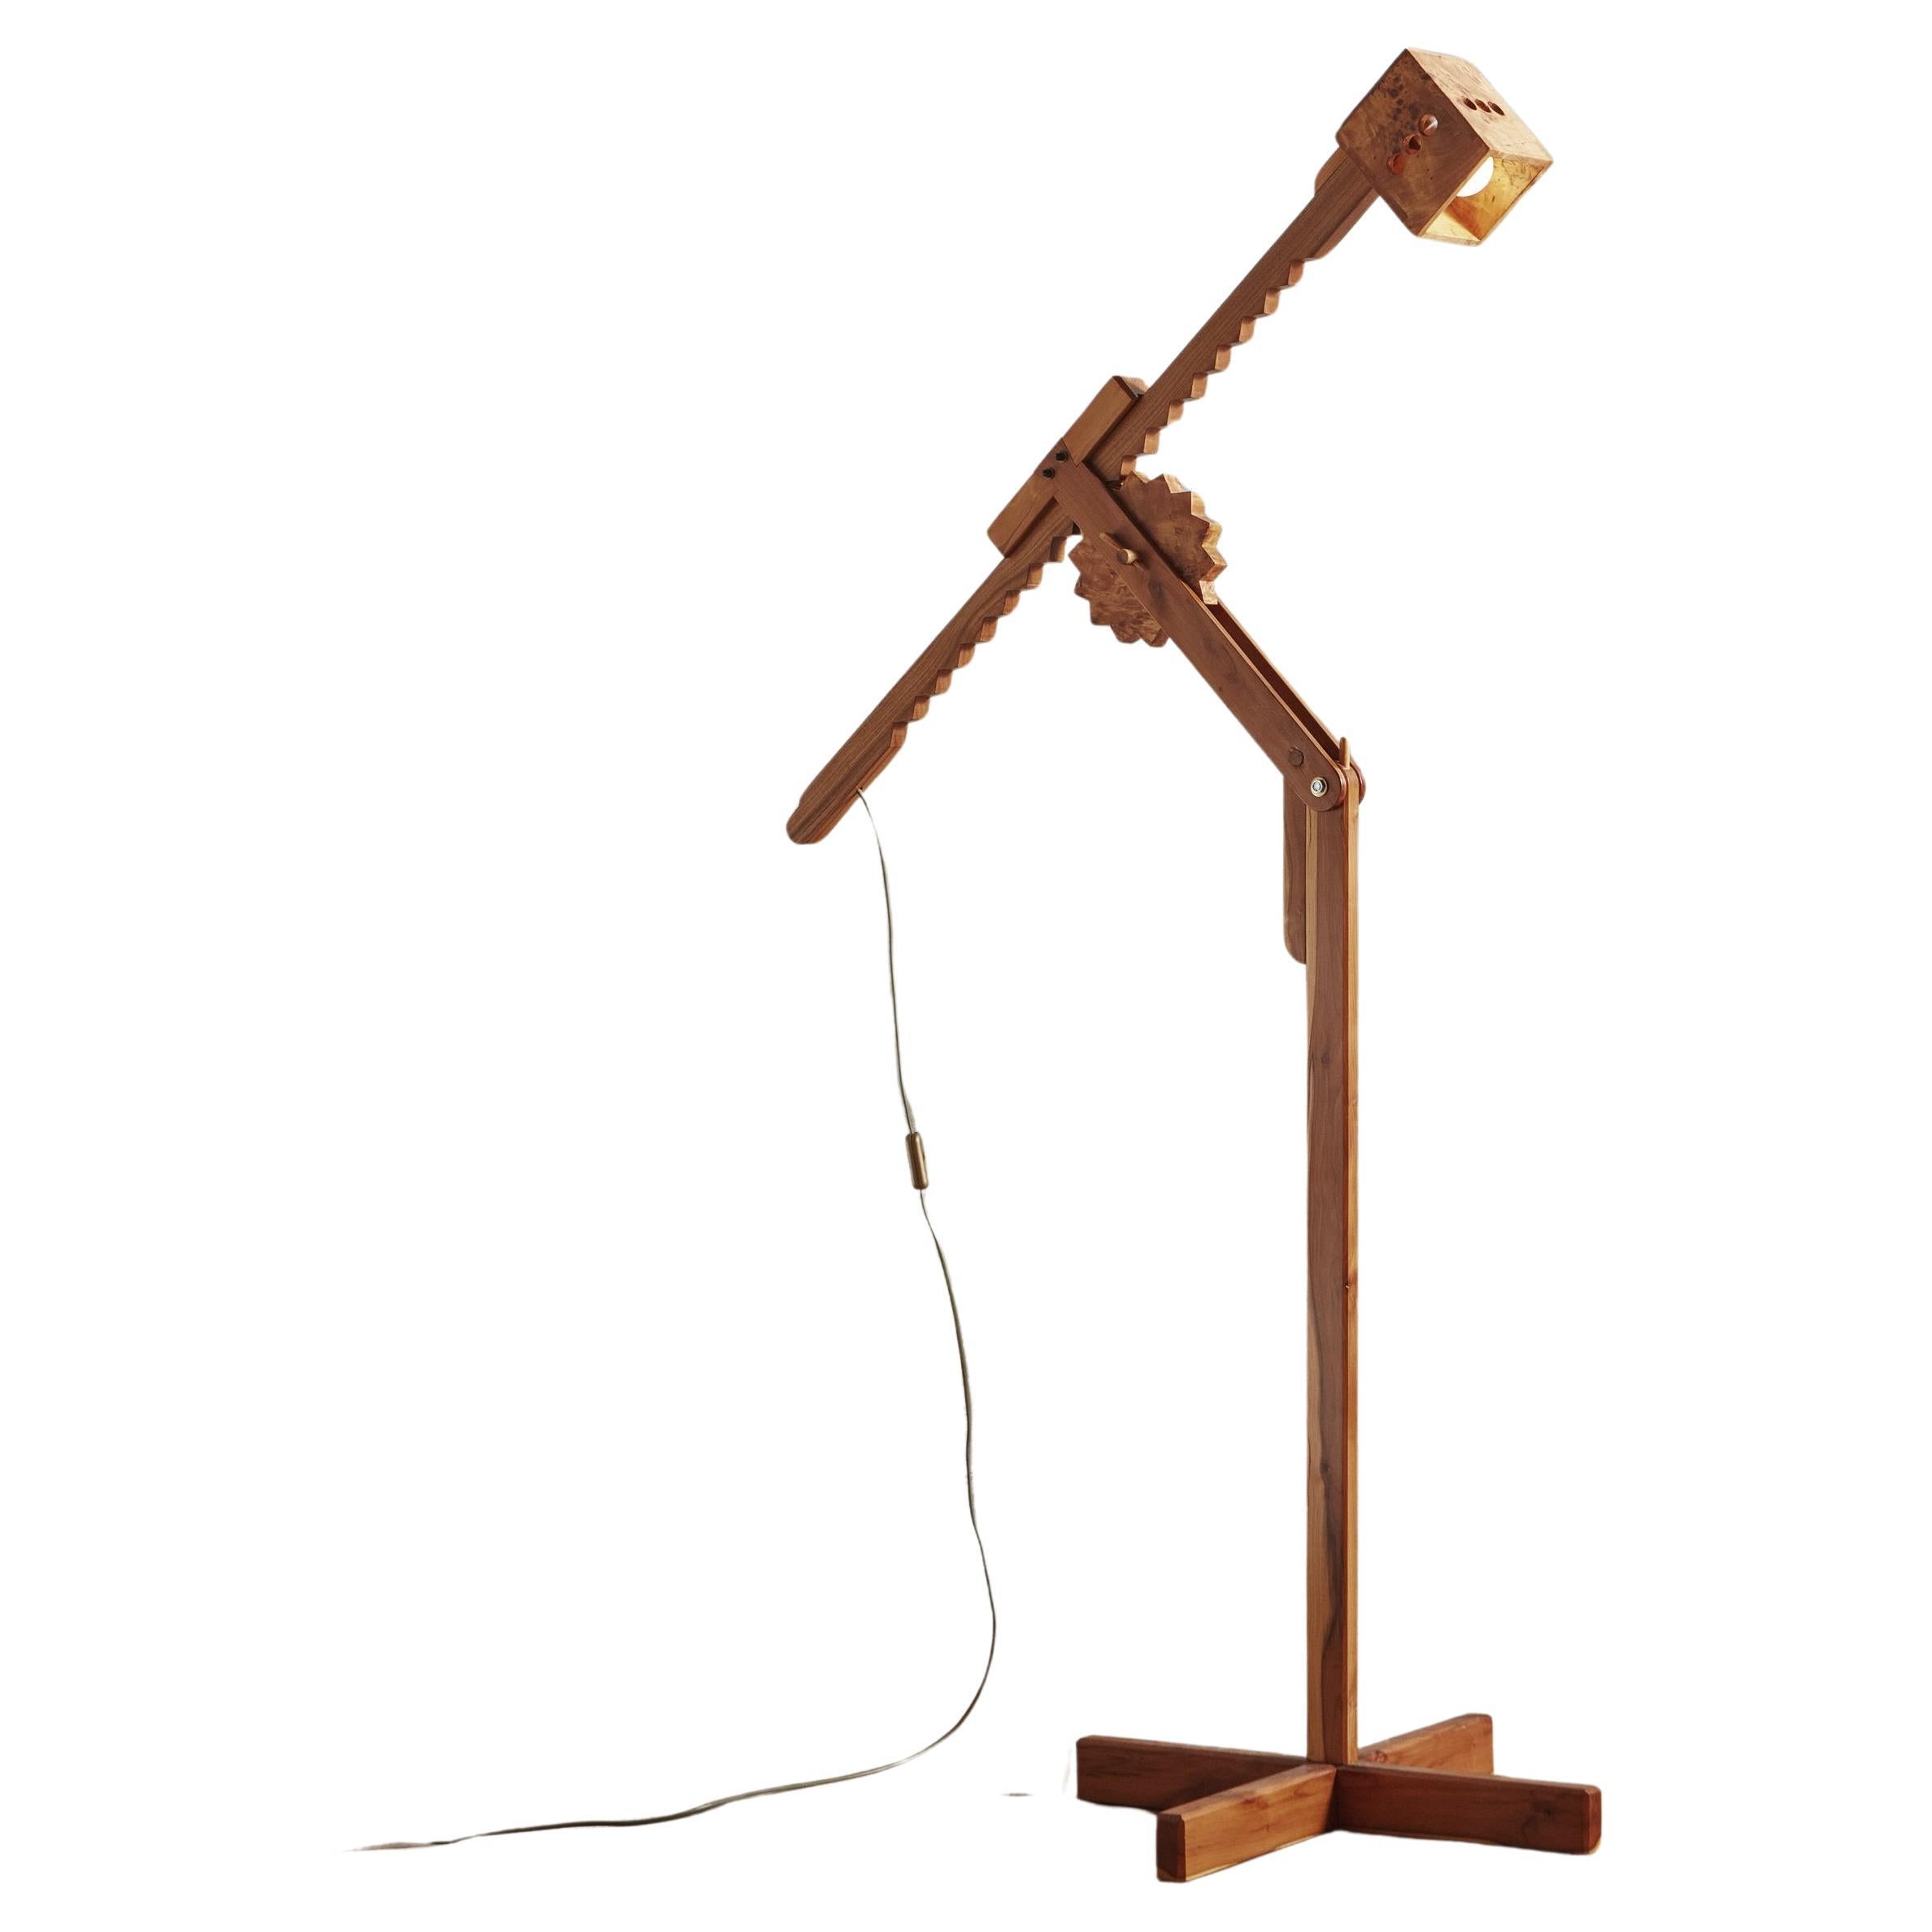 Pinocchio Adjustable Floor Lamp in Pine by Pietro Cascella for Reflo, Italy 1972 For Sale